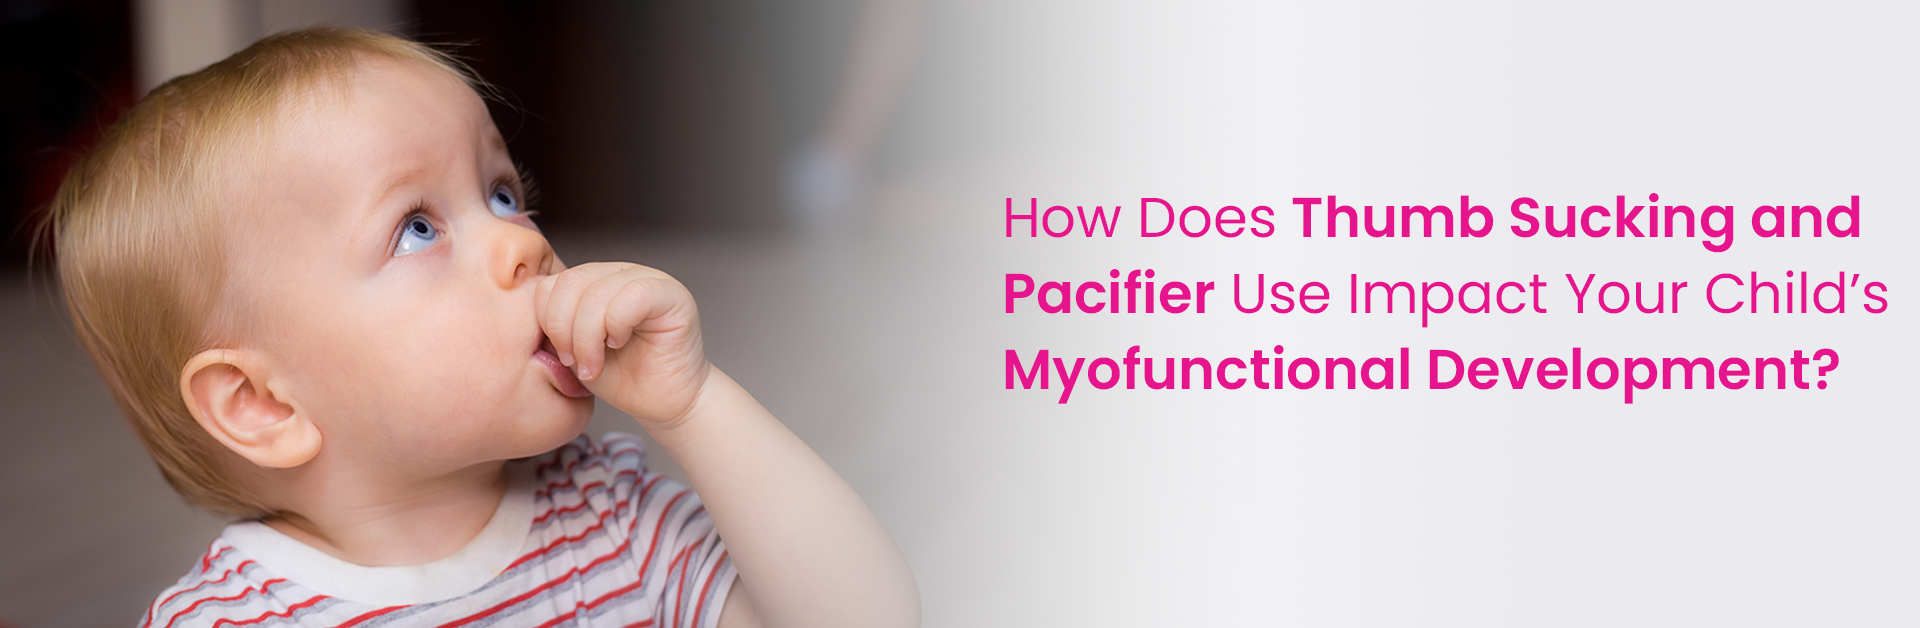 HOW DOES THUMB SUCKING AND PACIFIER USE IMPACT YOUR CHILD’S MYOFUNCTIONAL DEVELOPMENT?